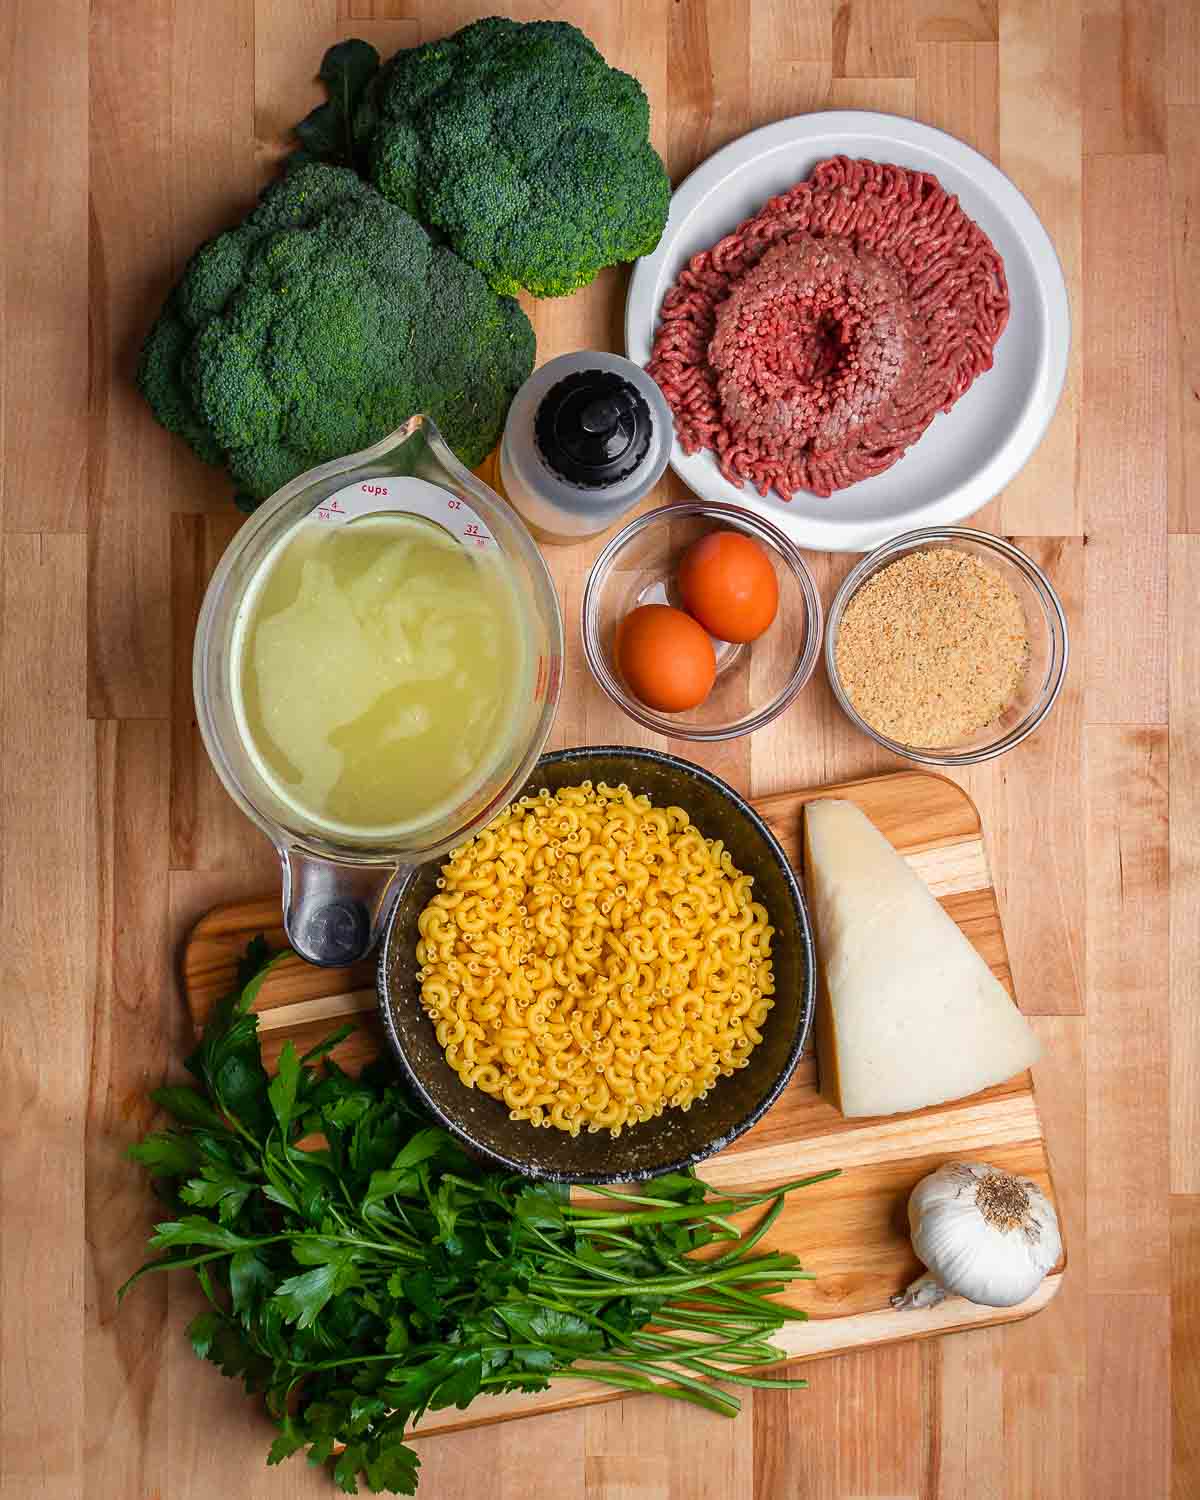 Ingredients shown: broccoli, ground beef, olive oil. chicken stock, eggs, breadcrumbs, macaroni, cheese, garlic, and parsley.